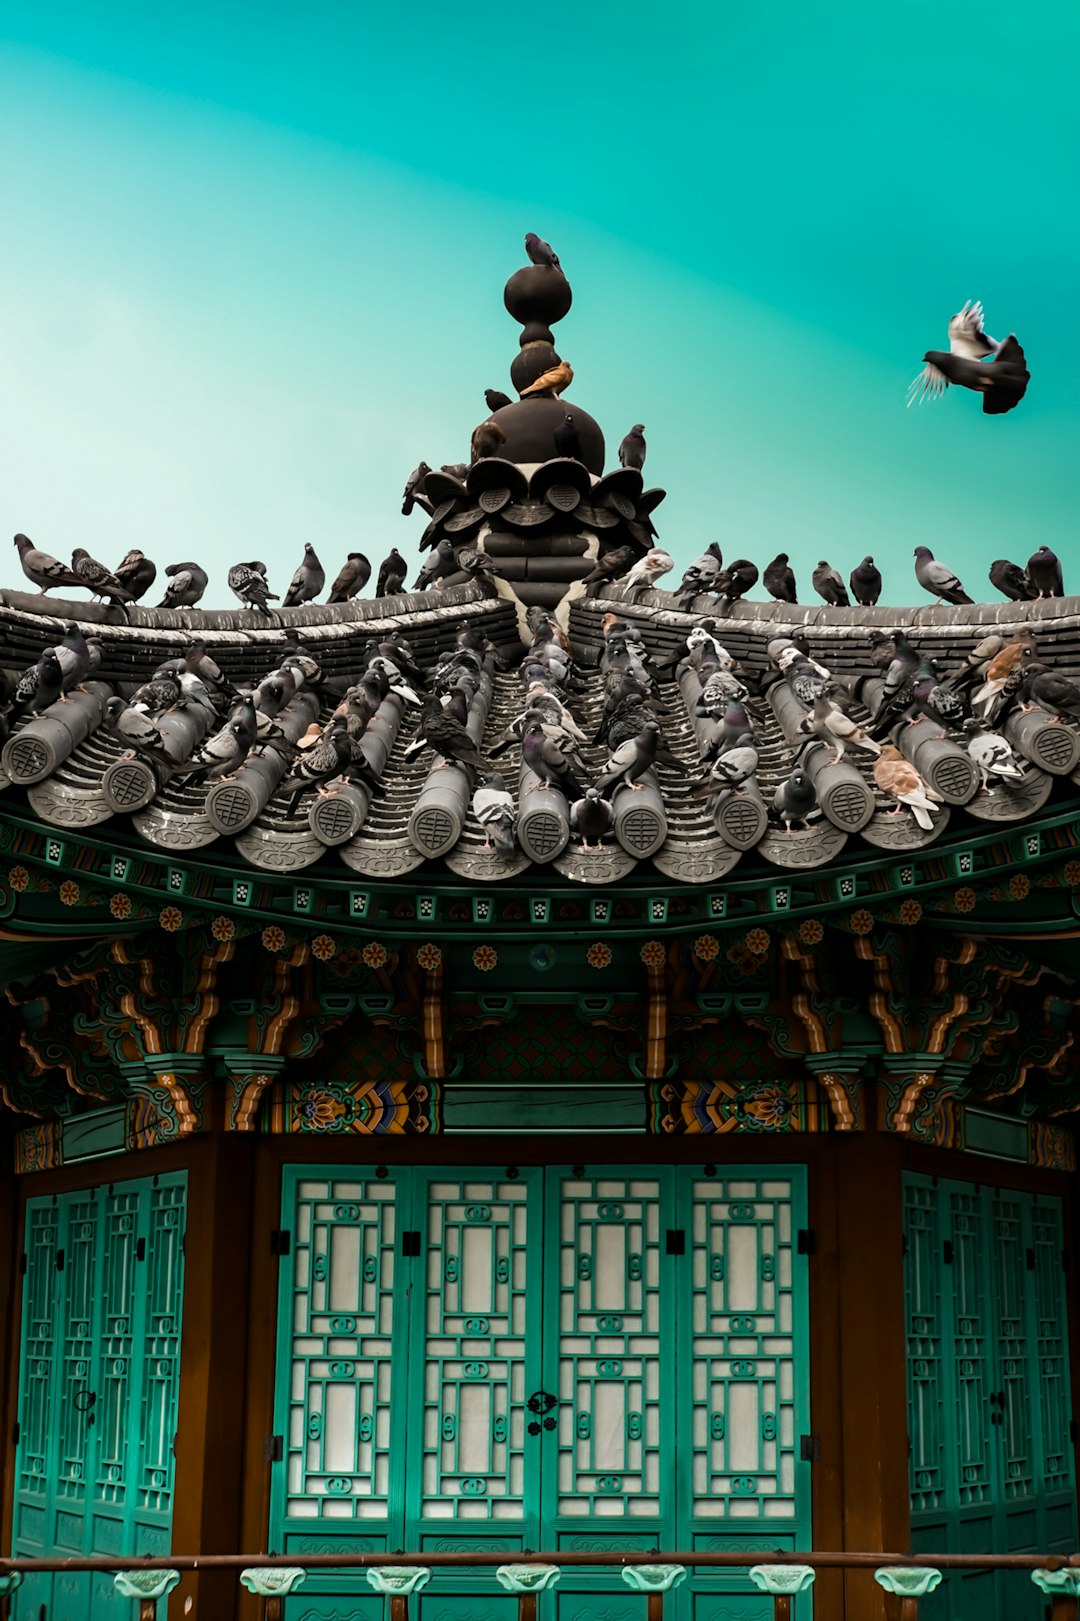 black and white bird flying over the temple during daytime